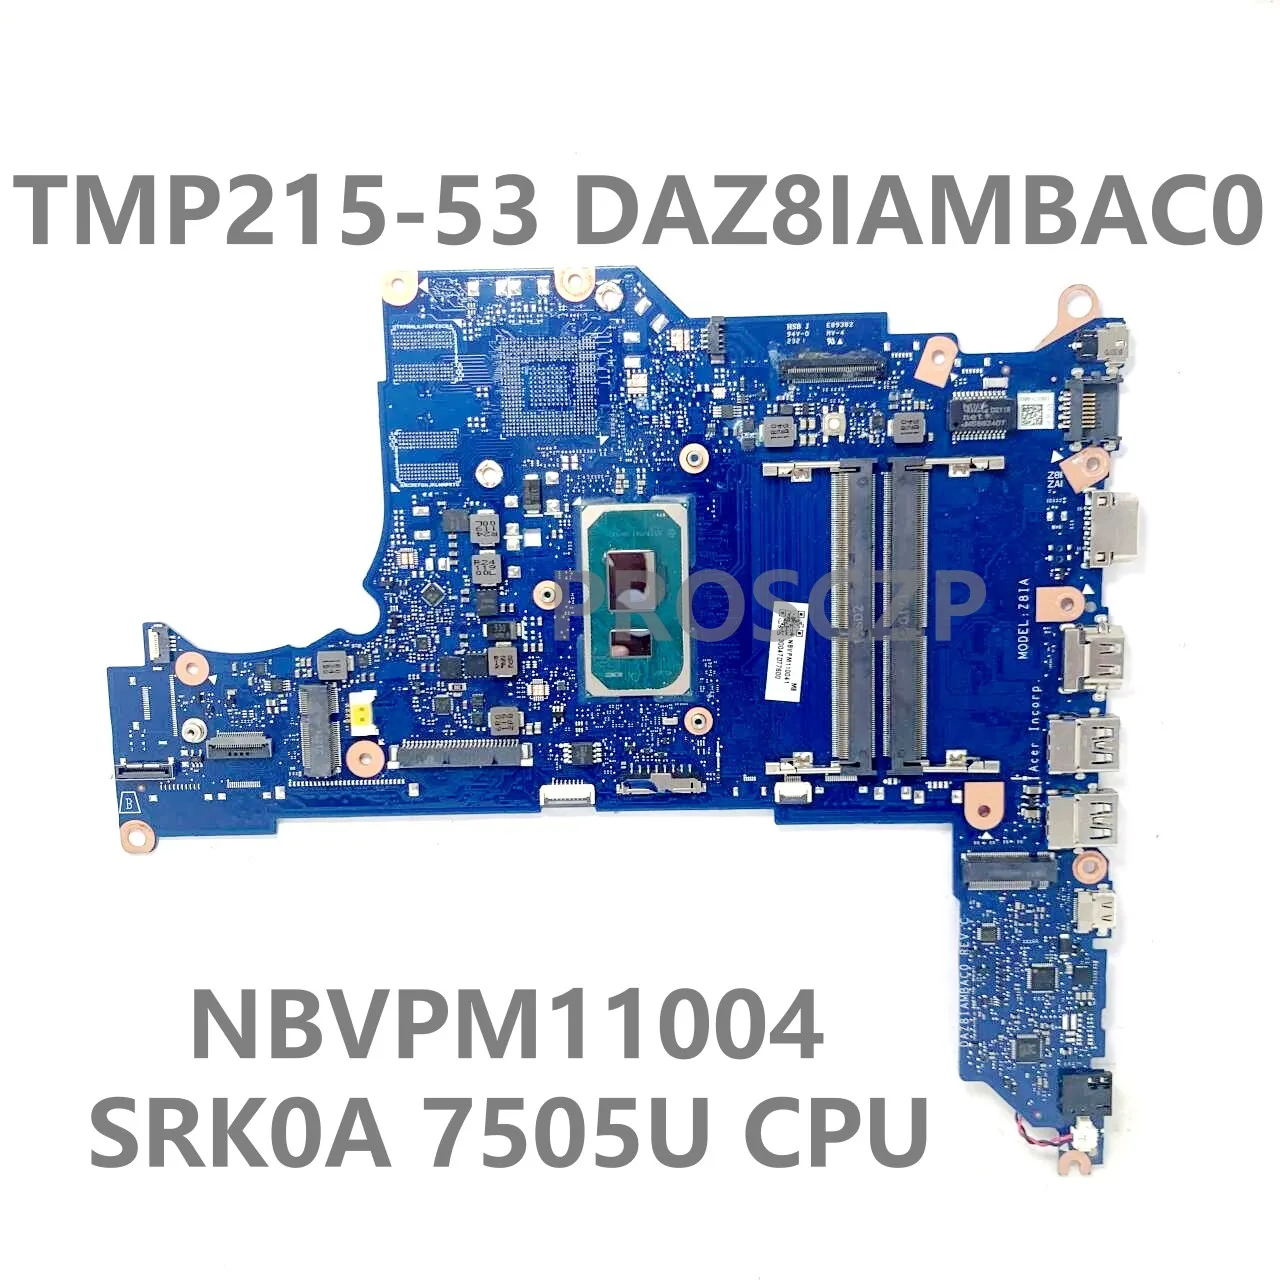 

For ACER TMP215-53 P215-51 P215-53 P214-53G Laptop Motherboard NBVPM11004 DAZ8IAMBAC0 Mainboard W/SRK0A 7505 CPU 100%Tested Good